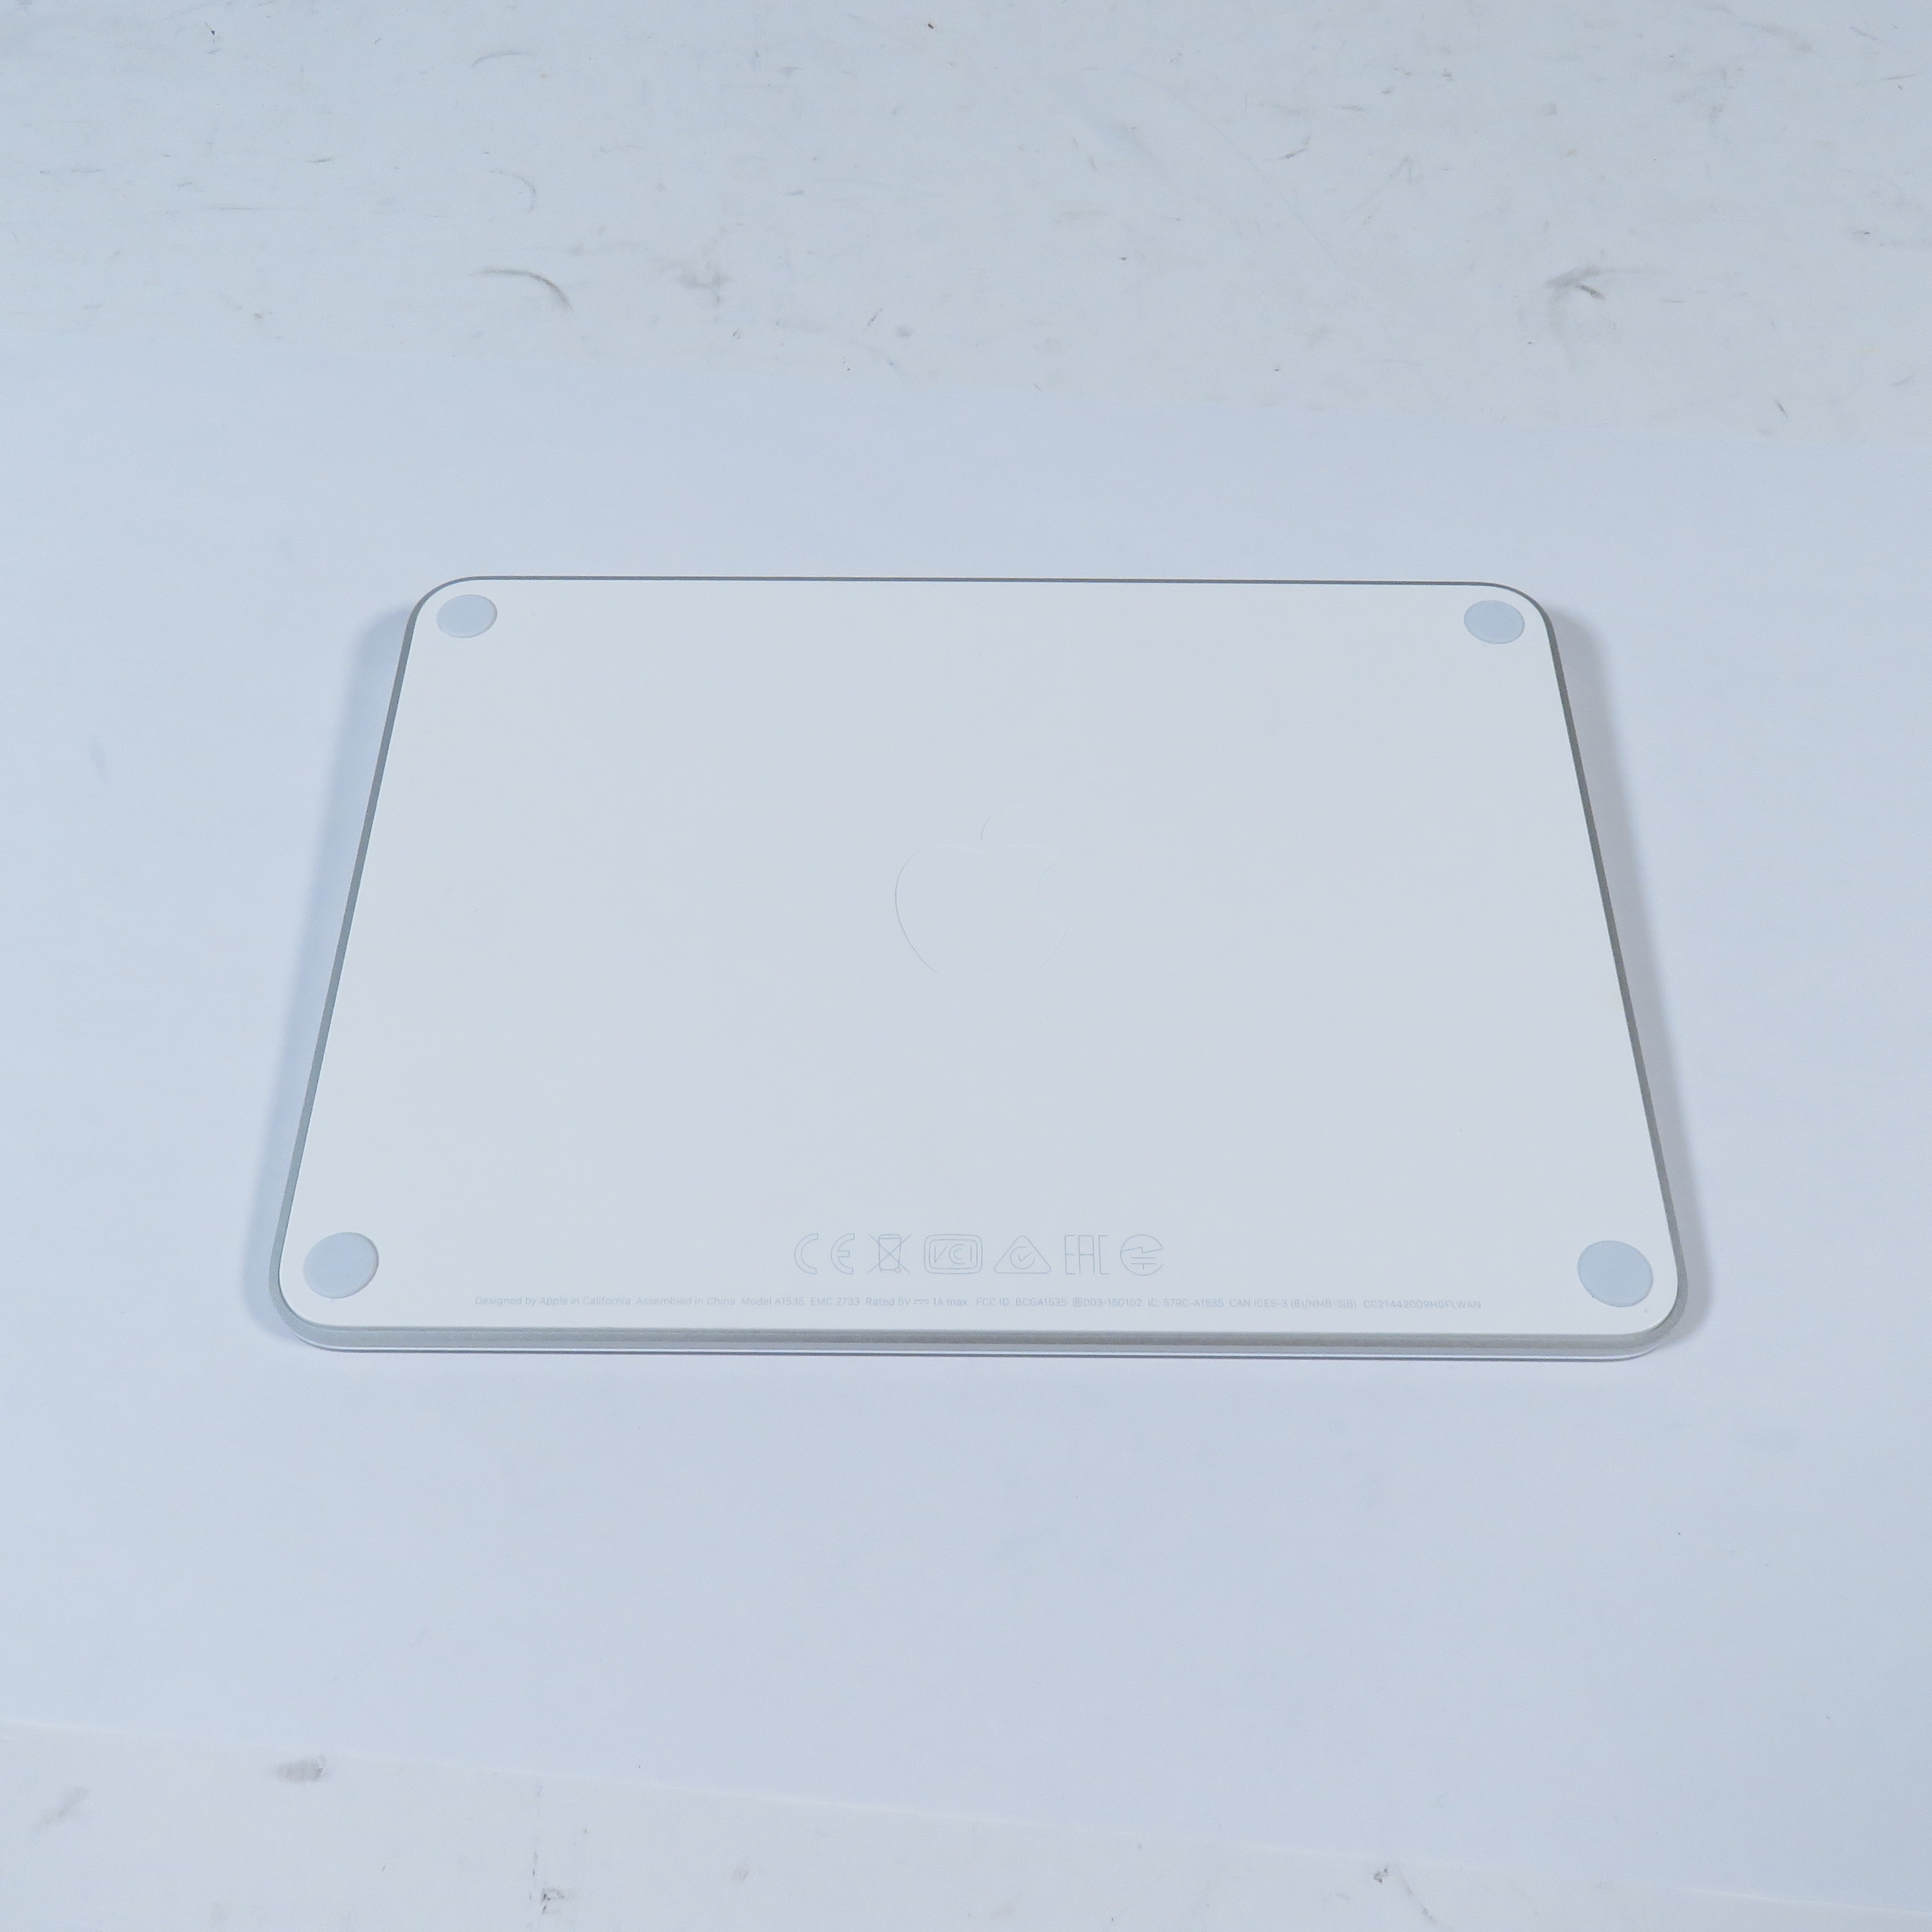 Apple Magic Trackpad 2 A1535 Force Touch Bluetooth Wireless Touchpad